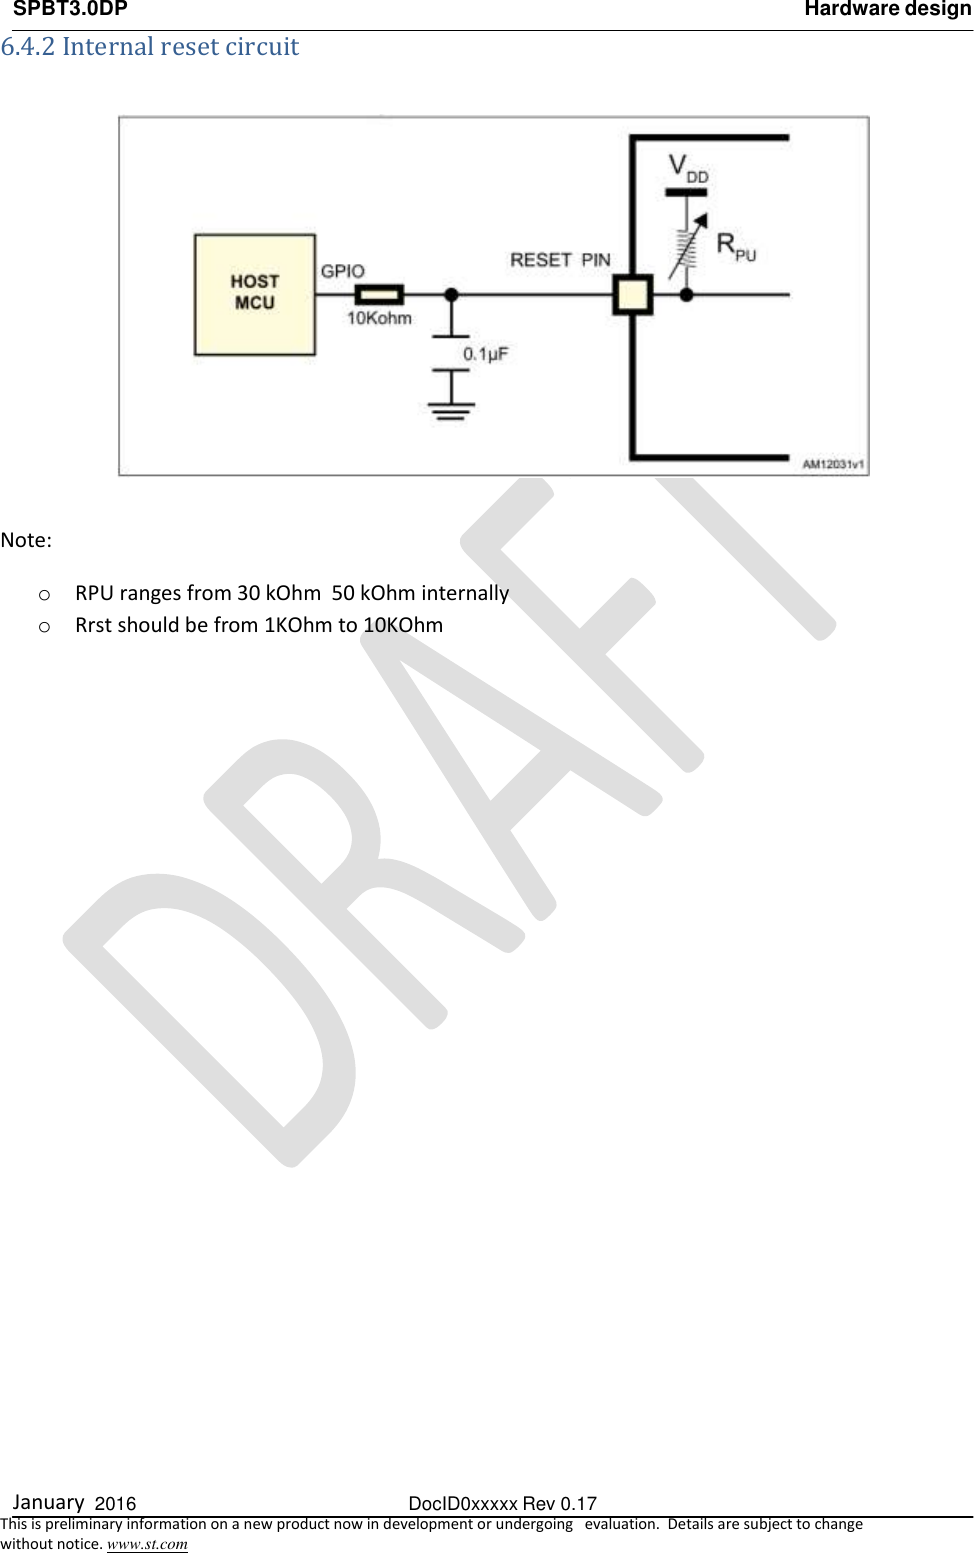 SPBT3.0DP Hardware design  January  2016  DocID0xxxxx Rev 0.17   This is preliminary information on a new product now in development or undergoing   evaluation.  Details are subject to change  without notice. www.st.com 6.4.2 Internal reset circuit    Note:  o RPU ranges from 30 kOhm  50 kOhm internally o Rrst should be from 1KOhm to 10KOhm 